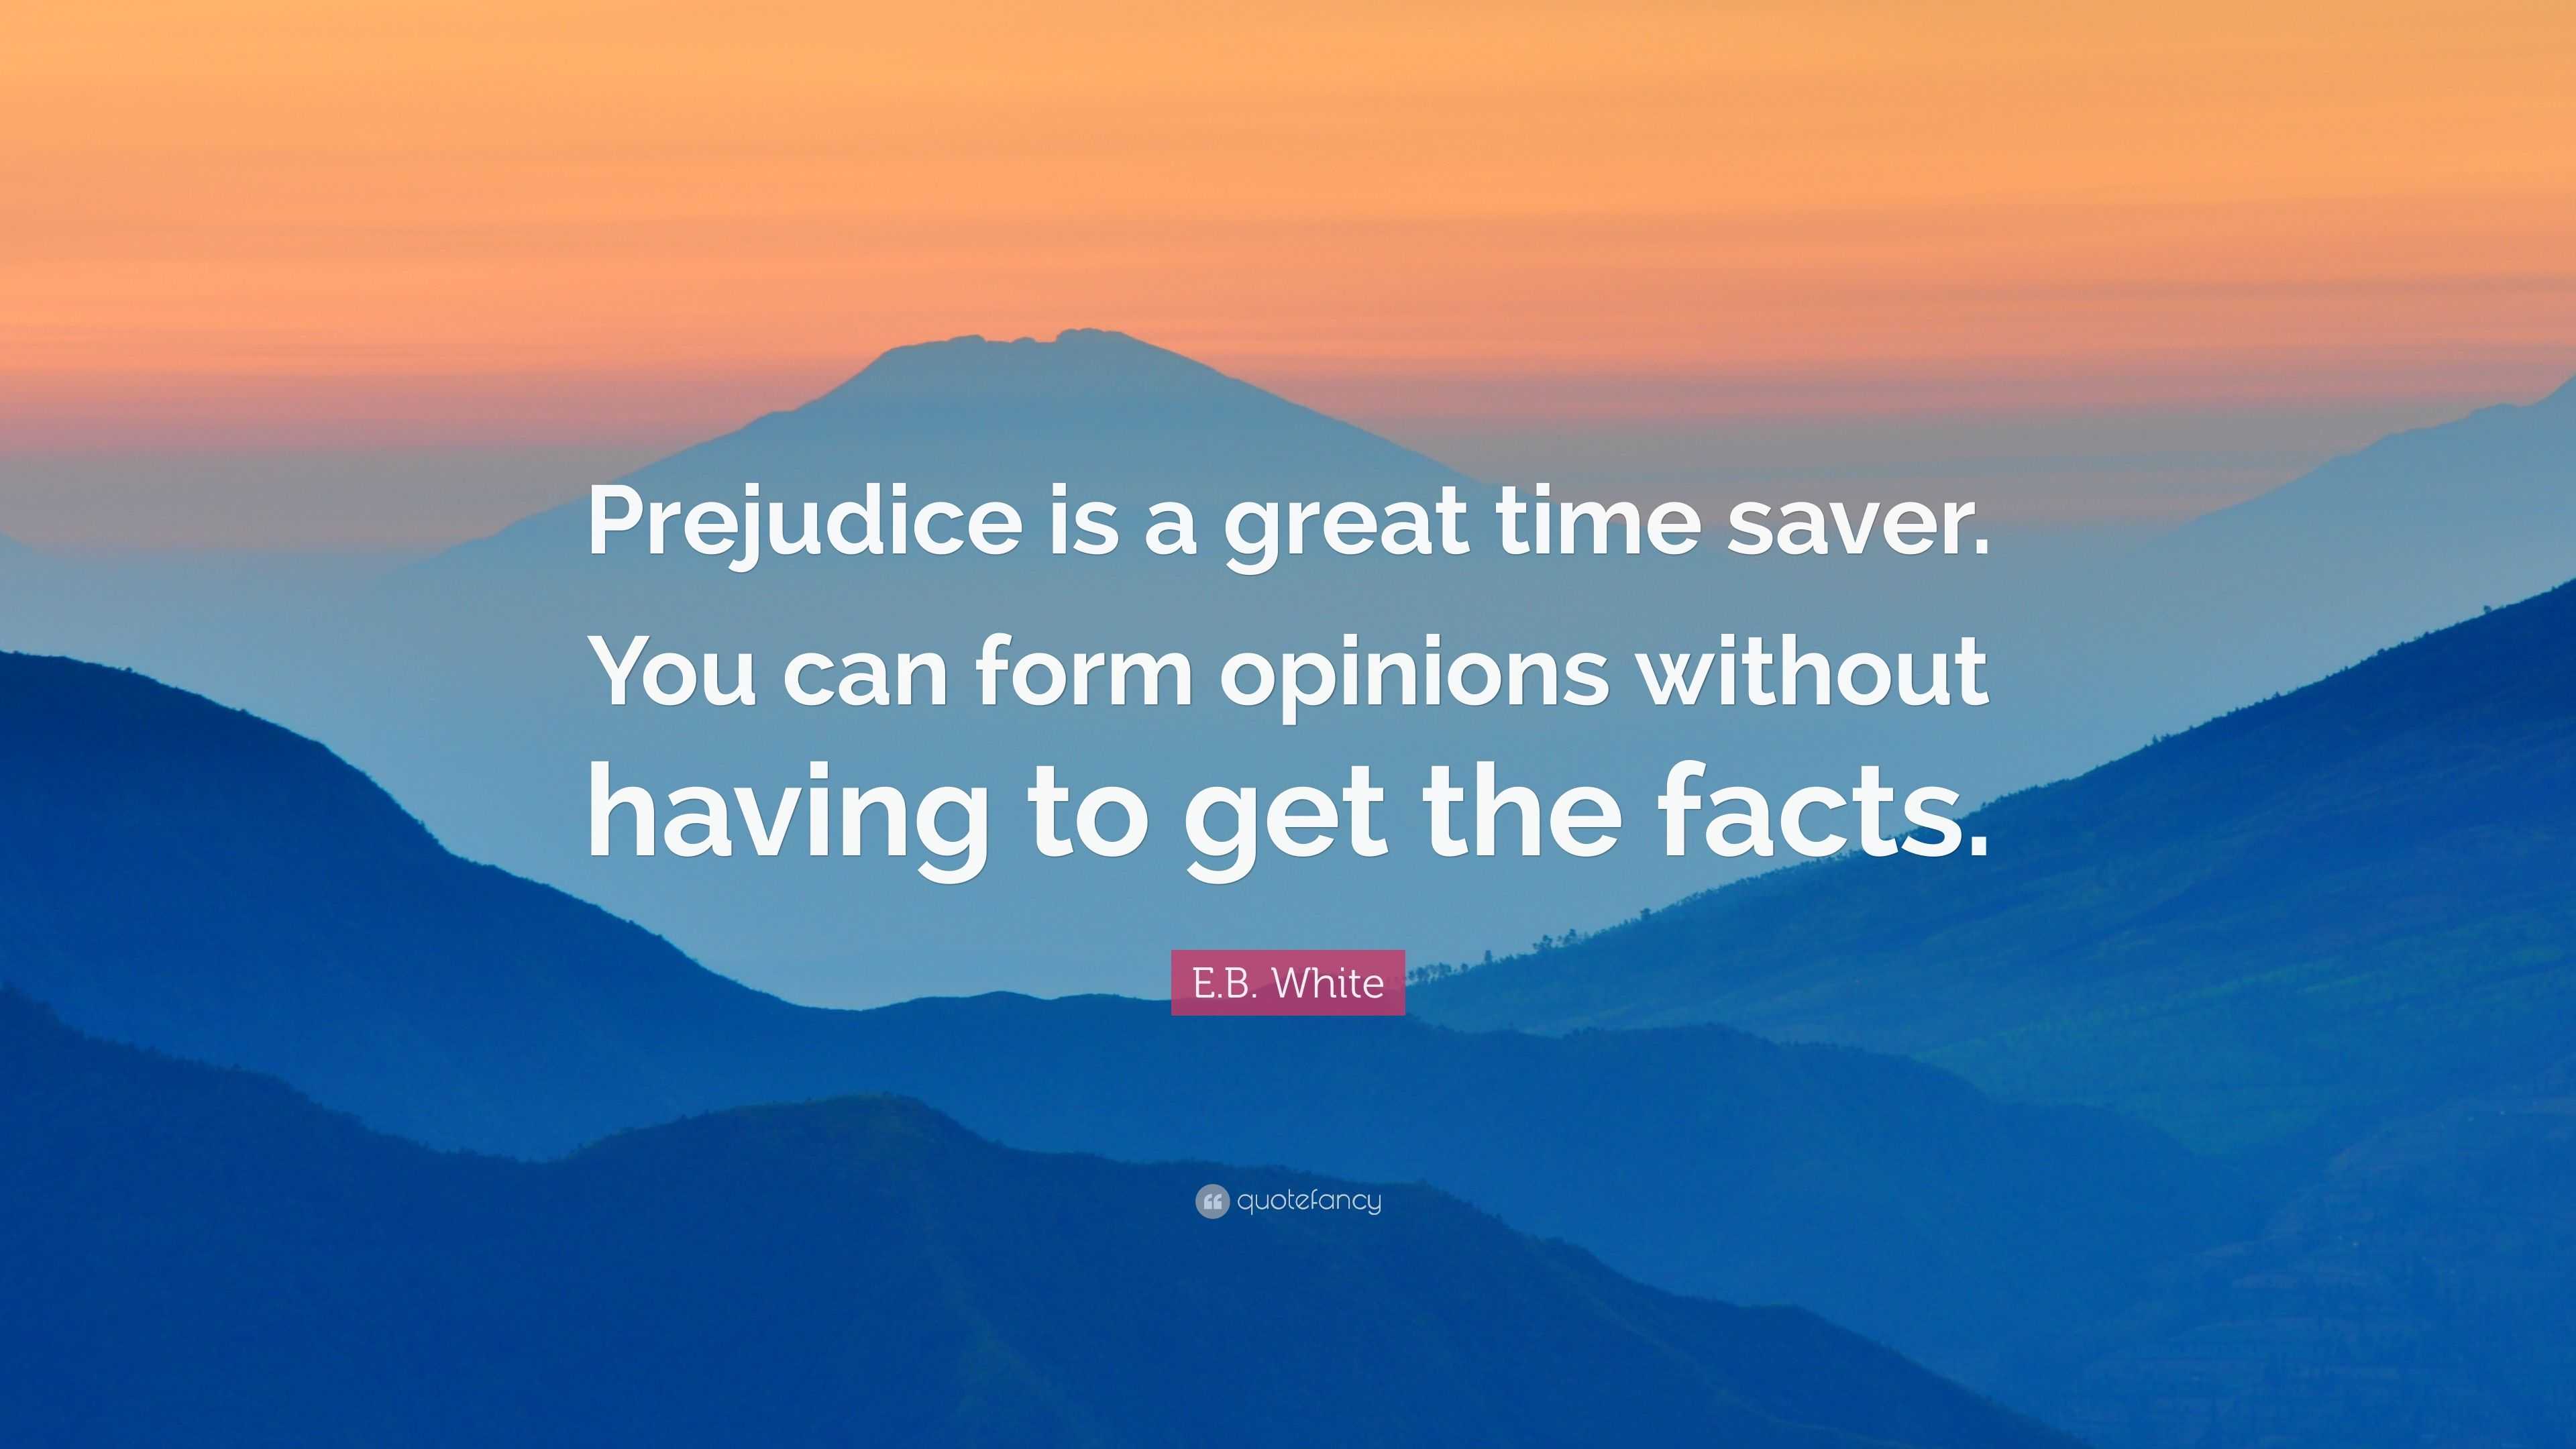 E.B. White Quote: “Prejudice is a great time saver. You can form ...